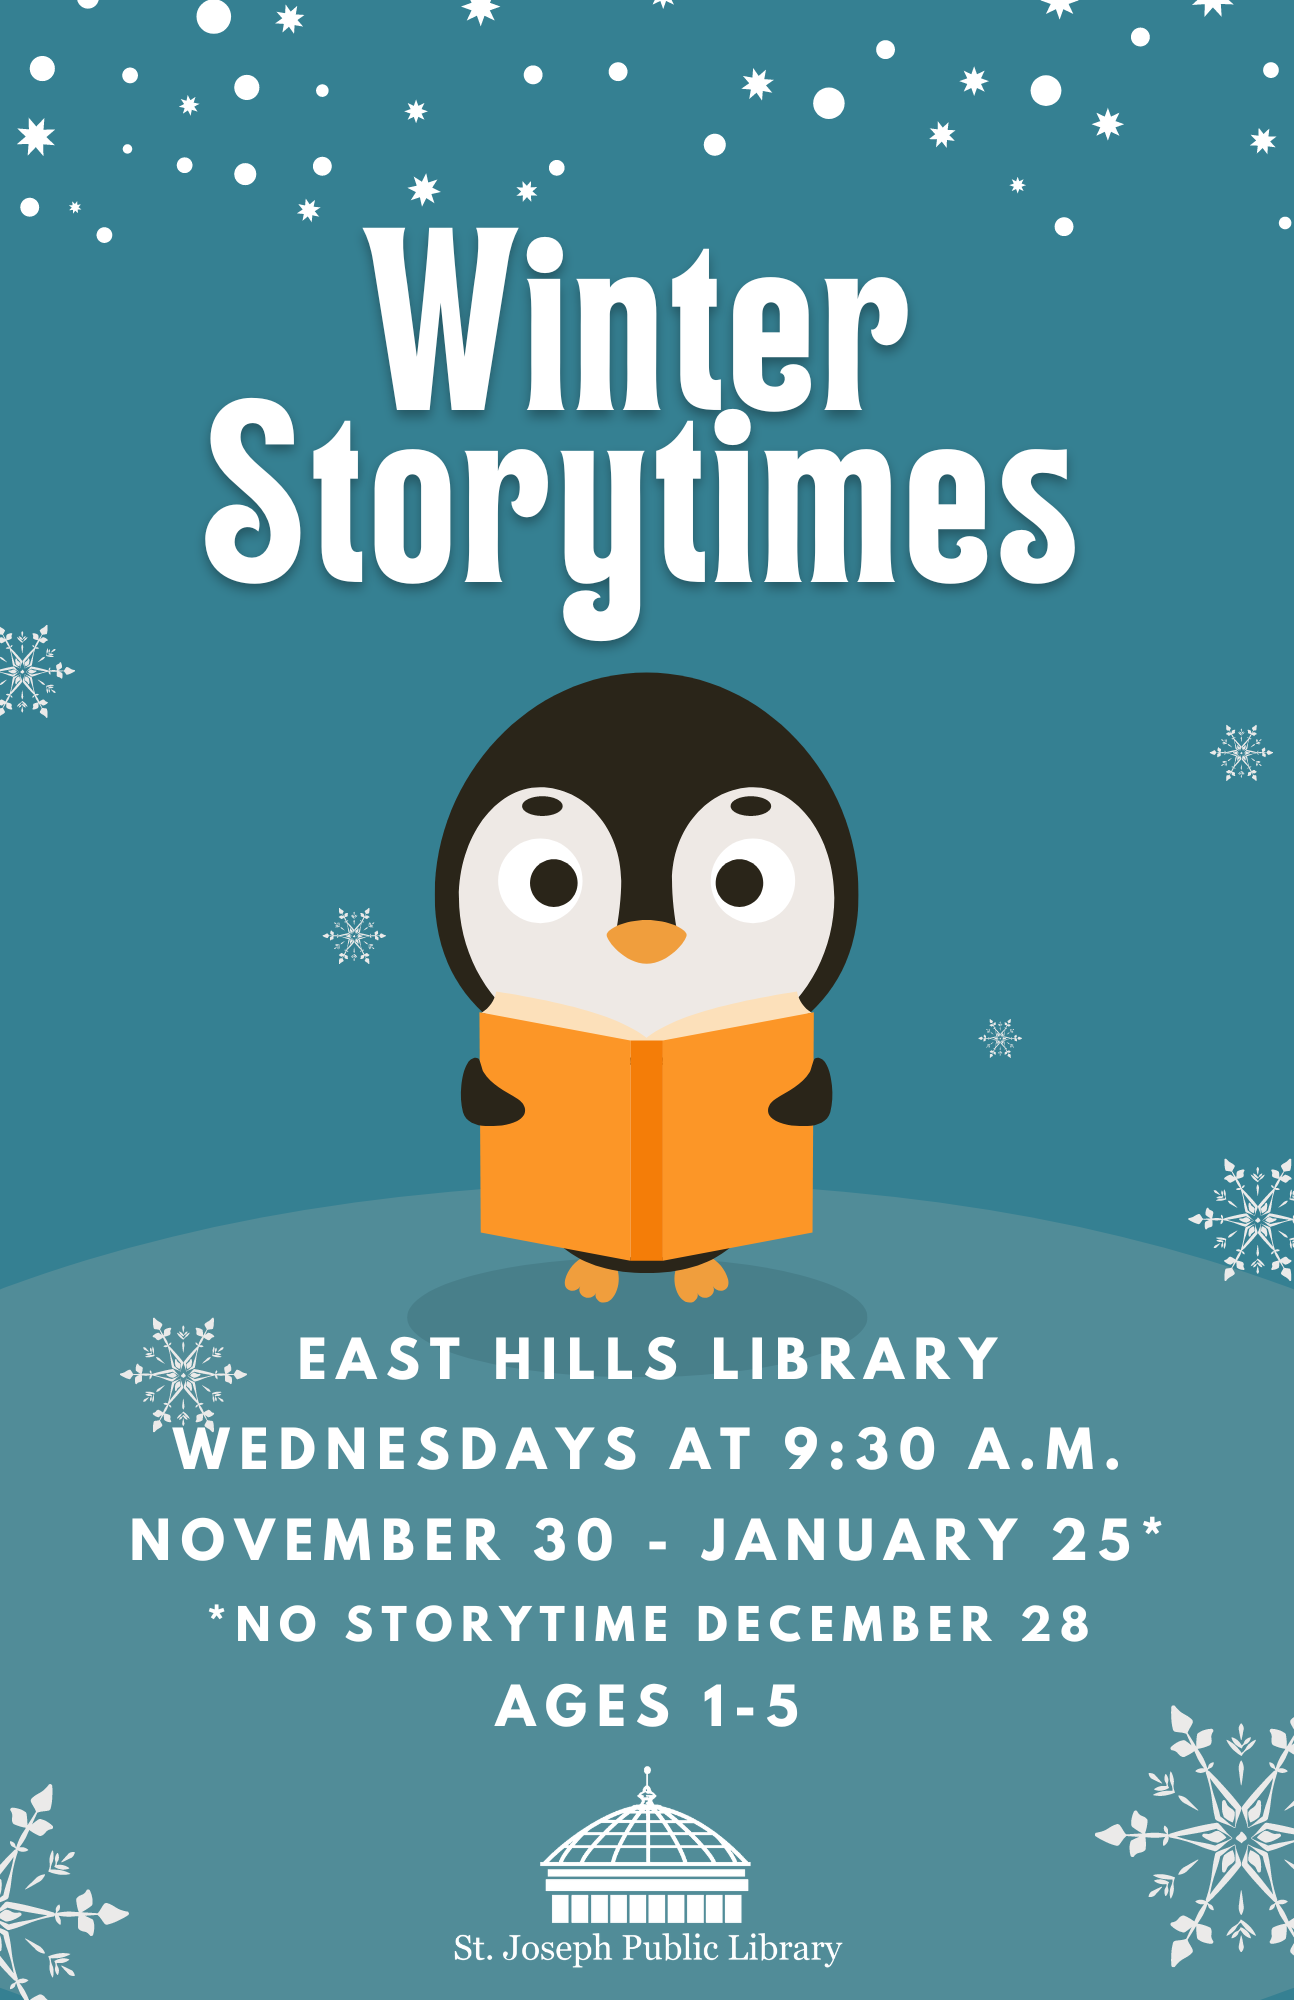 Winter Storytime, for ages 1-5, East Hills Library Wednesdays at 9:30 a.m.